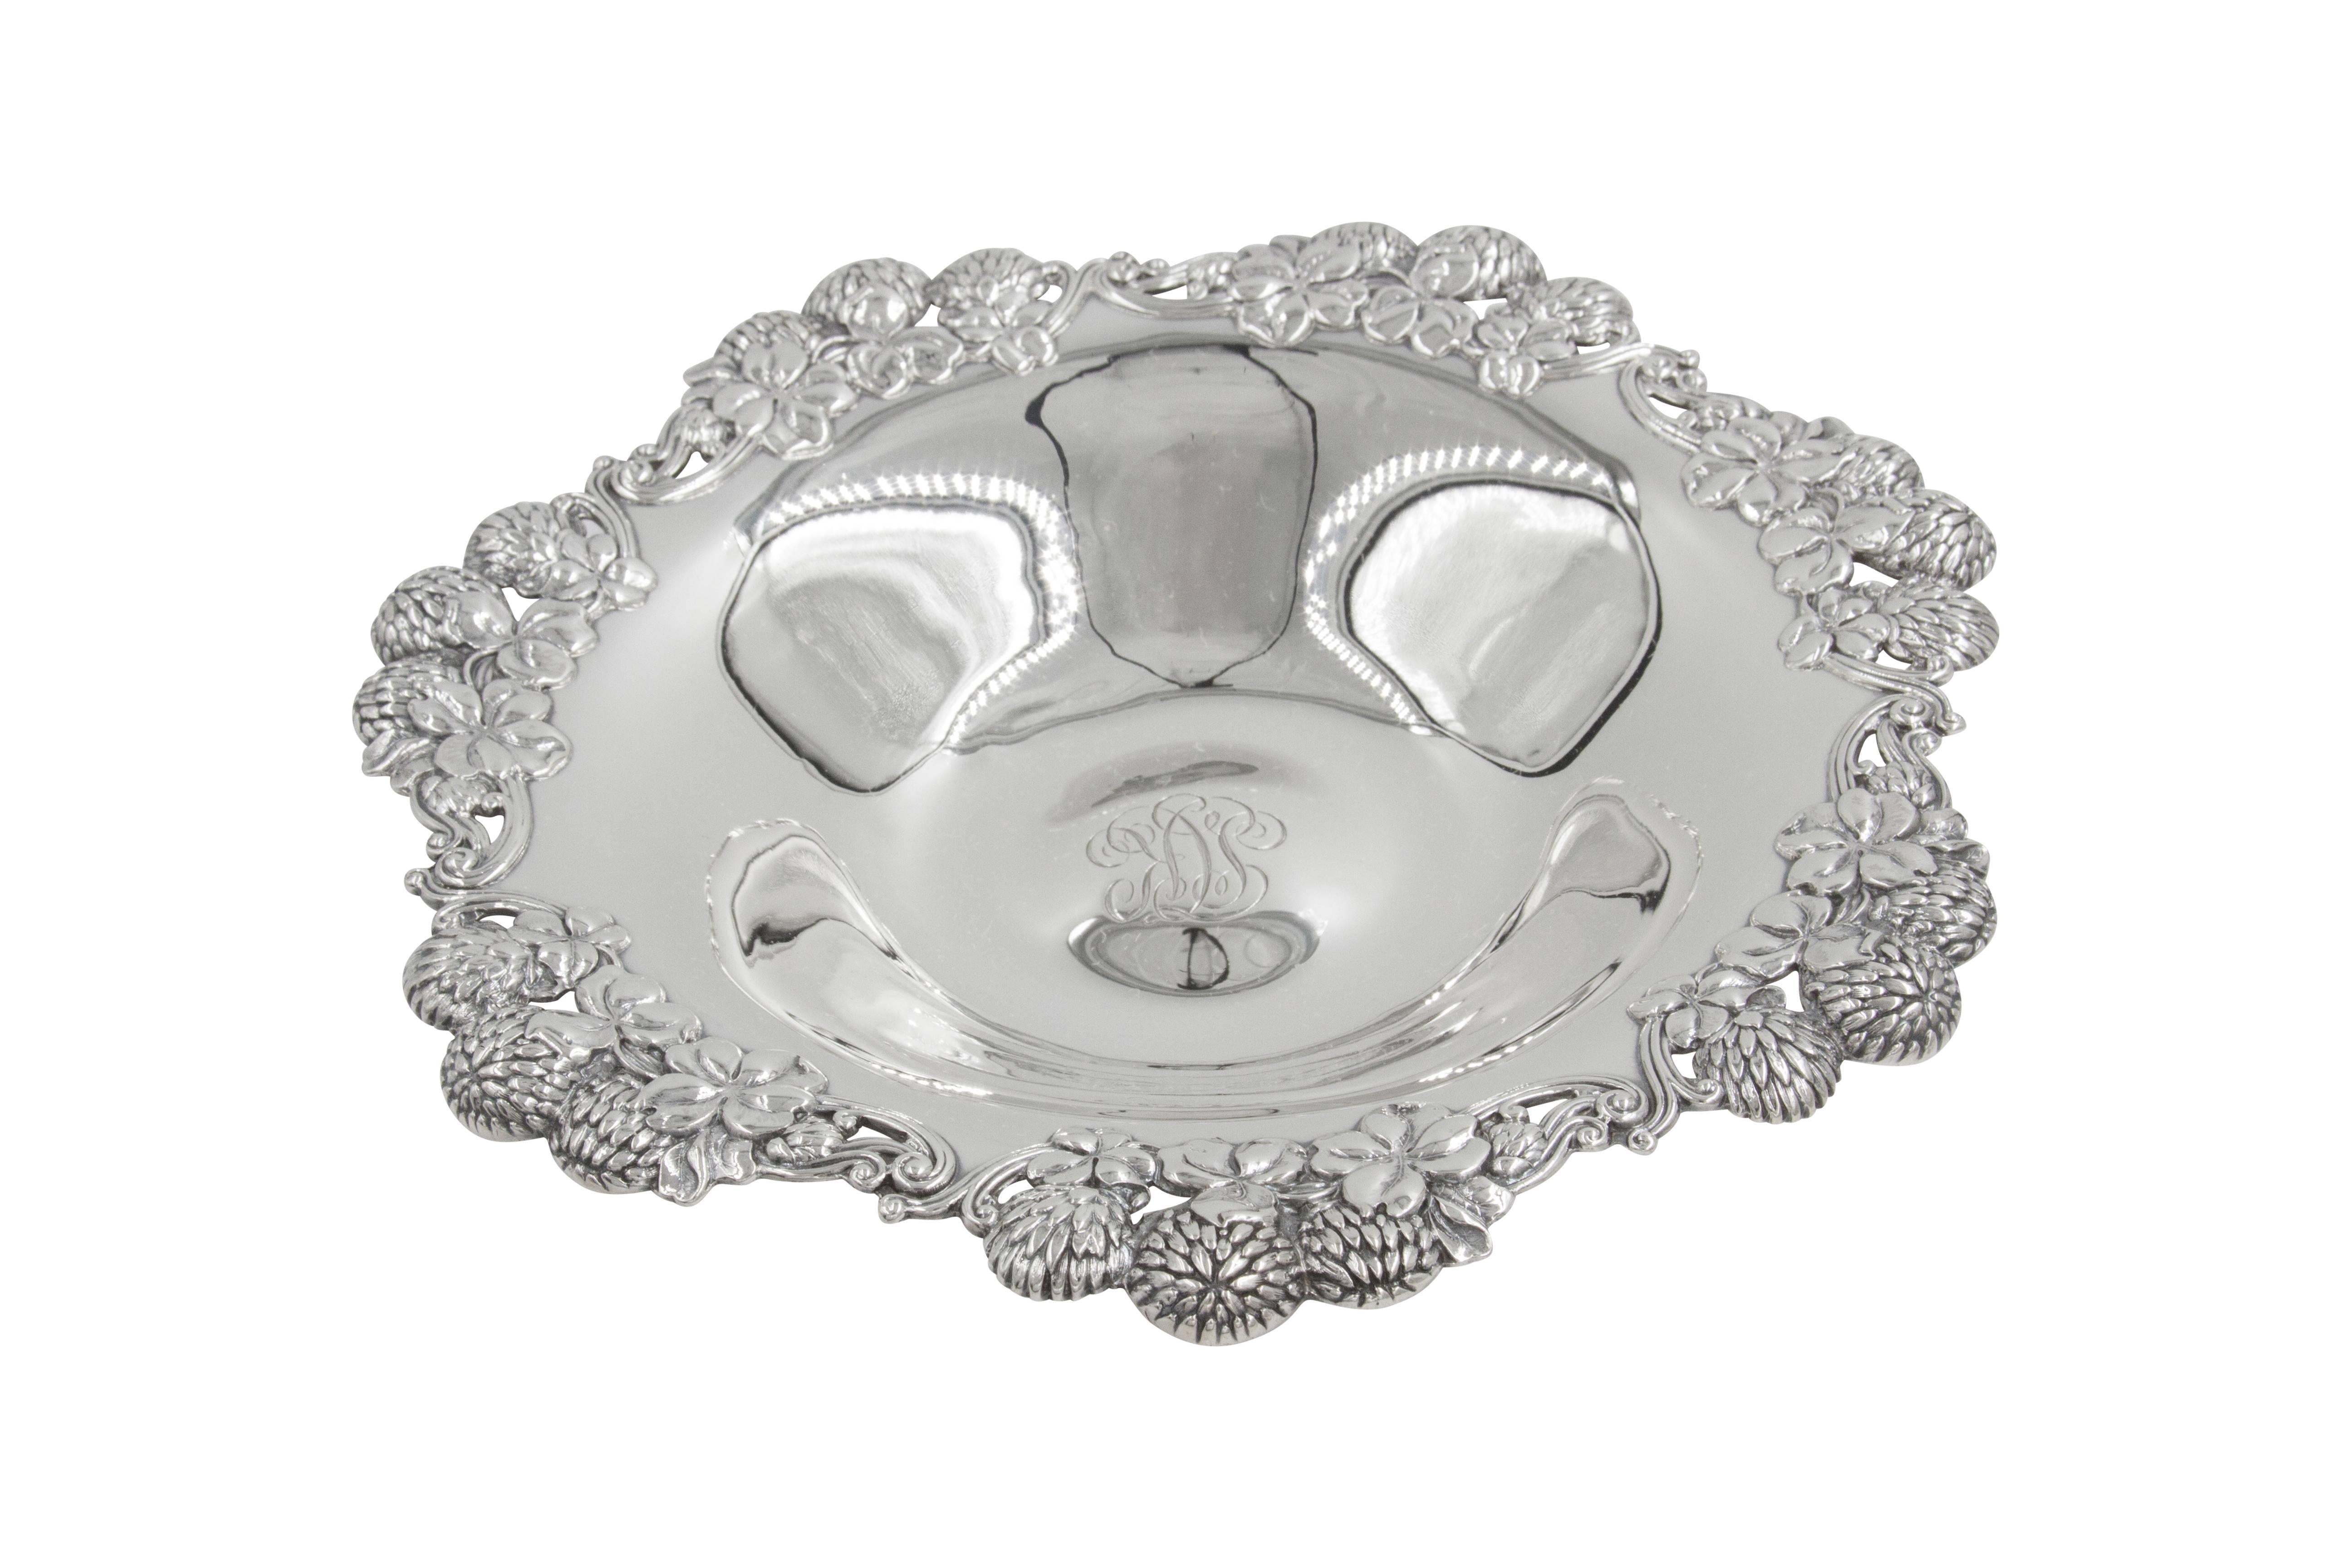 Here are a pair of lovely Tiffany & Co candy dishes that are the perfect size for a coffee table. Modern dishes with a rich ornate scalloped rim. Hydrangeas and other flowers in groups of three encircle the dishes, giving them an impressive look.